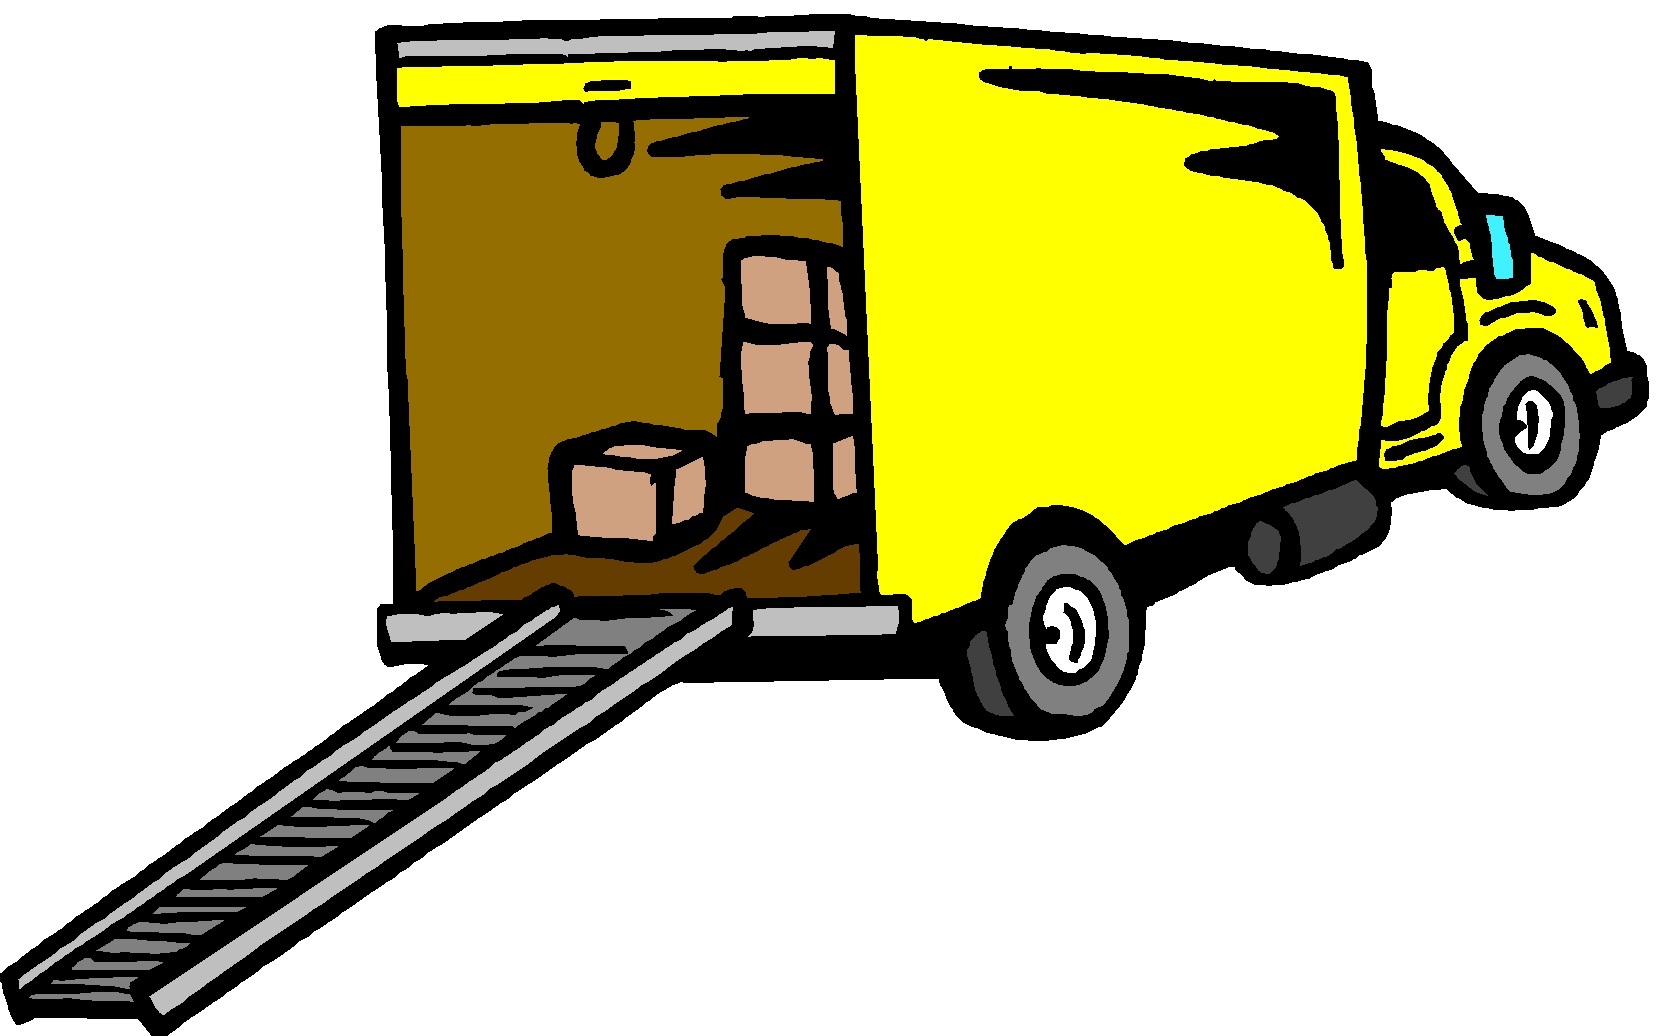 Moving truck clipart image.